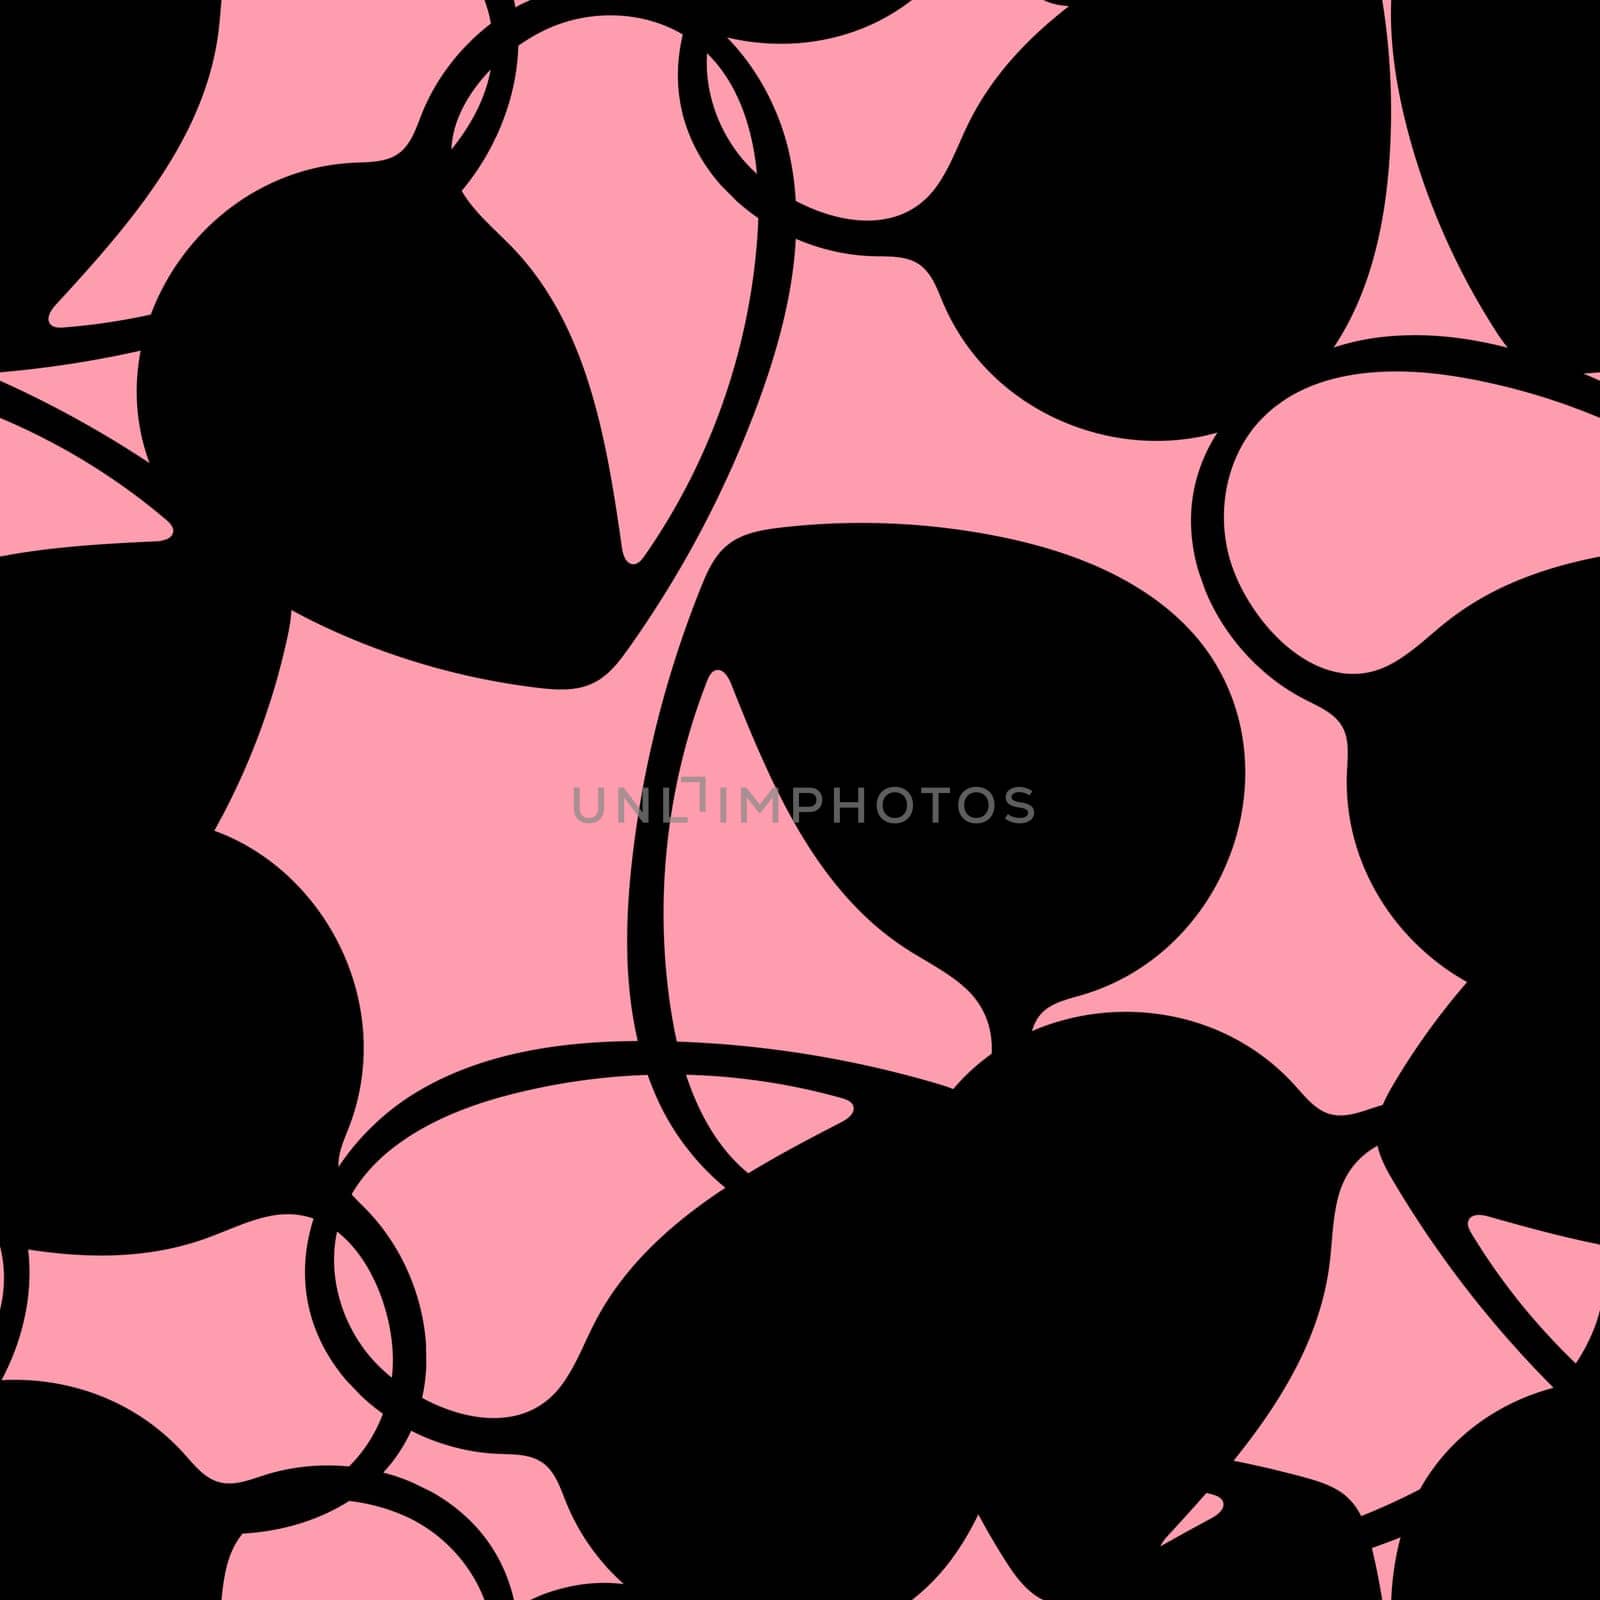 Hand Drawn Seamless Patterns with Hearts in Doodle Style. Romantic Love Digital Paper for Valentines Day. Black Hearts on Pale Pink Background.